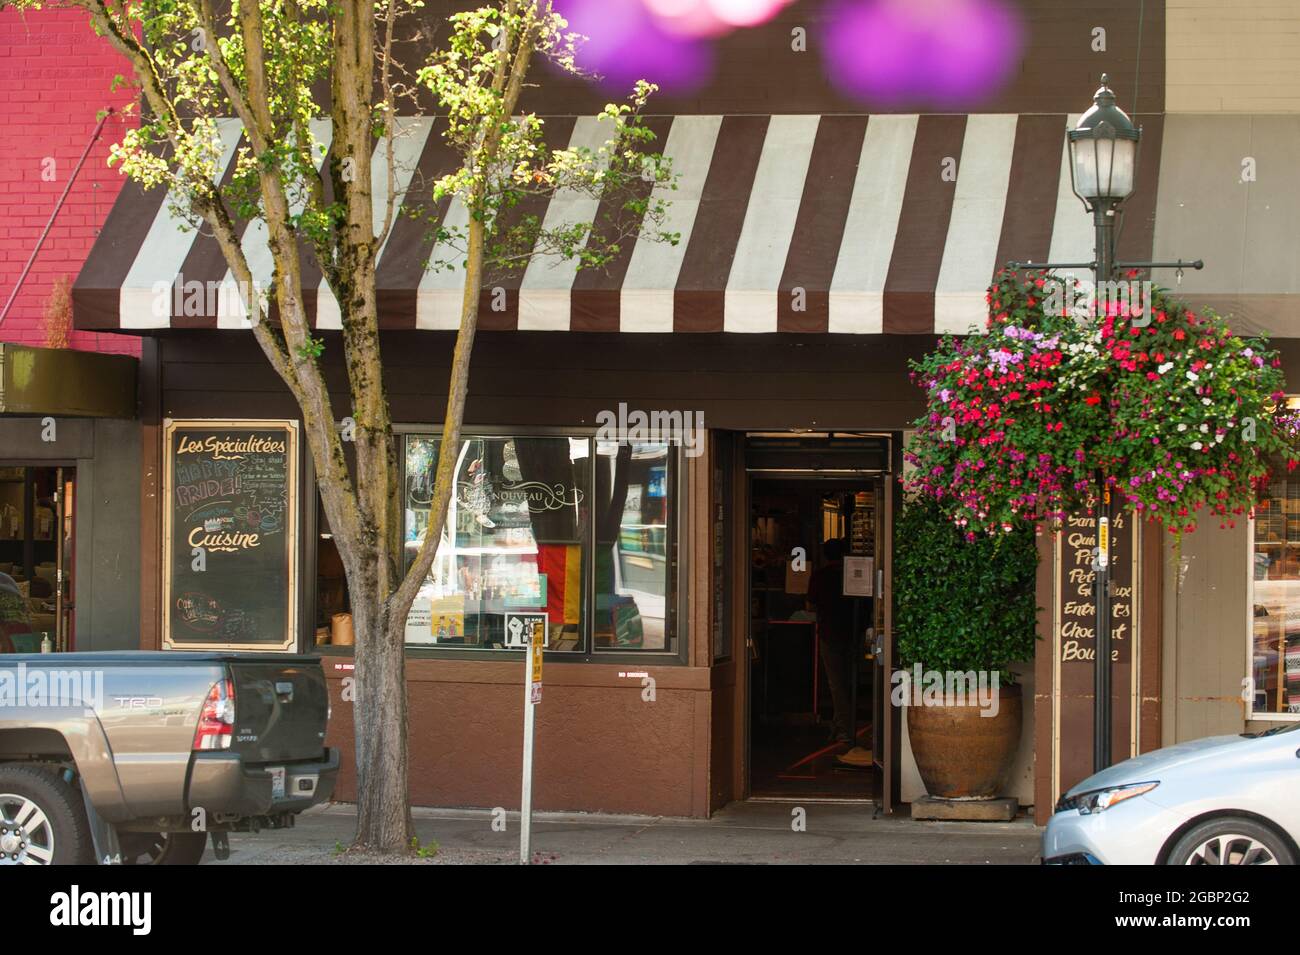 The West Seattle location of Bakery Nouveau in Seattle, WA. Stock Photo